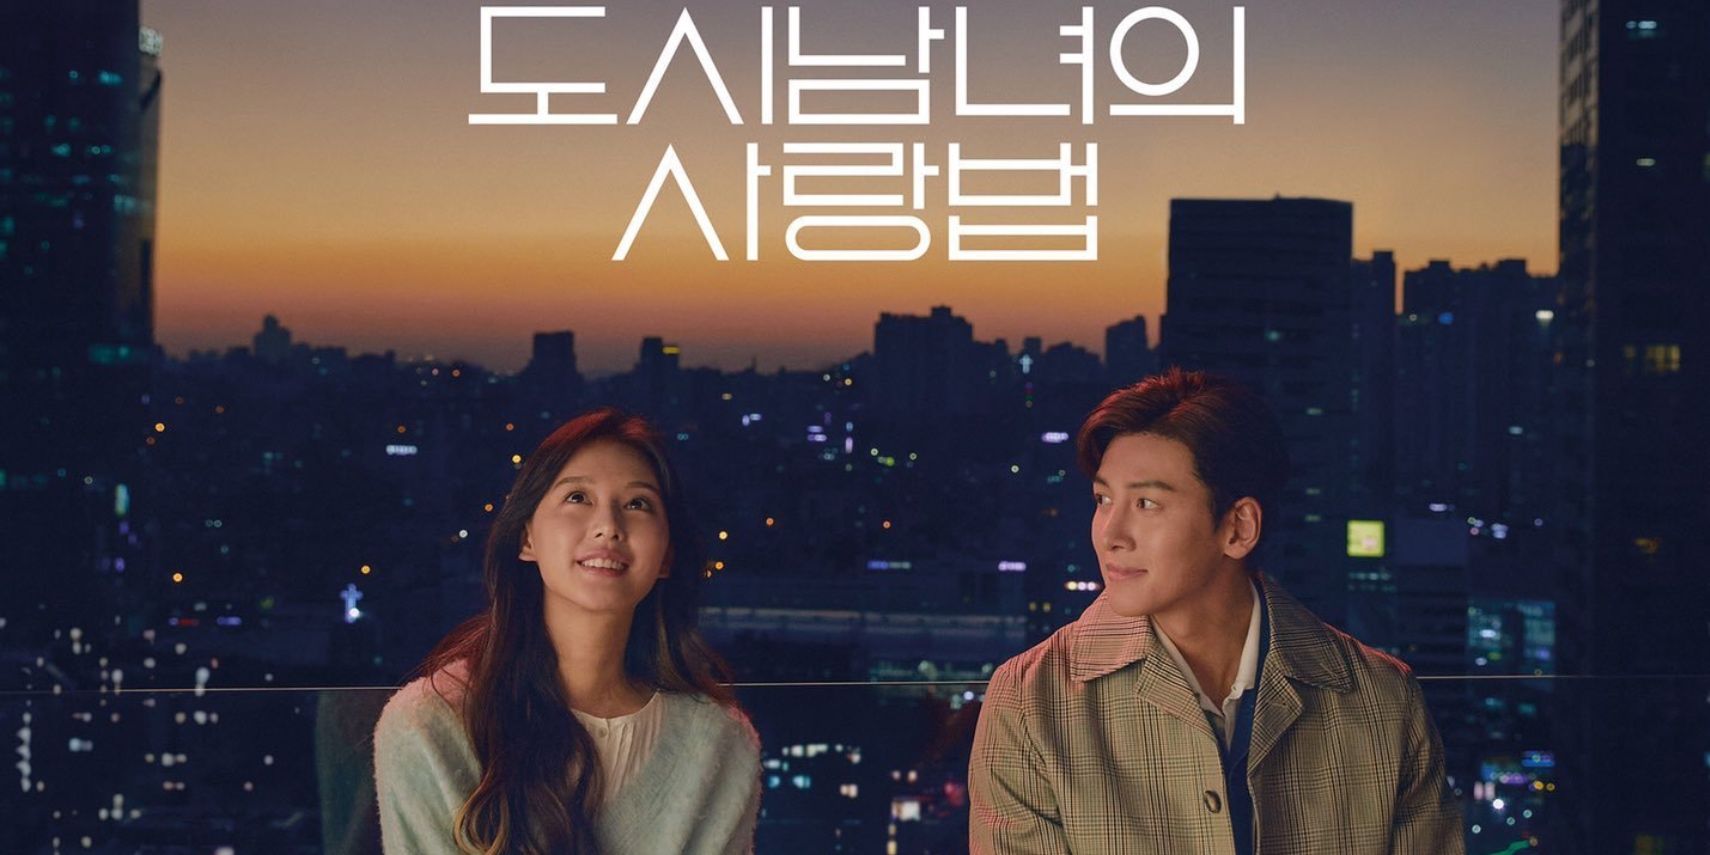 The title card for the Netflix K-drama Lovestruck in the City features two people against a city skyline